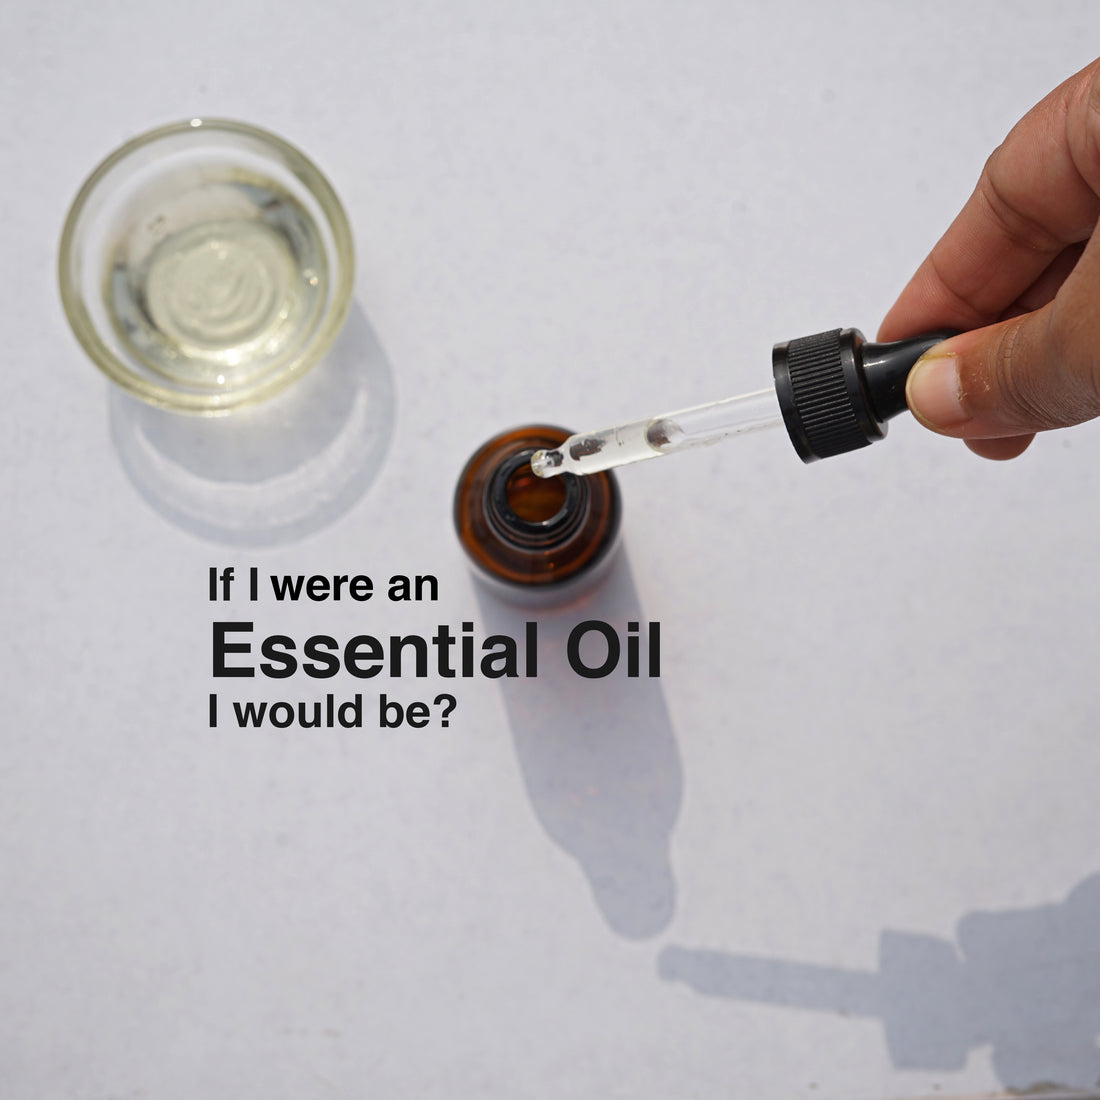 If I were an Essential Oil, I would be?